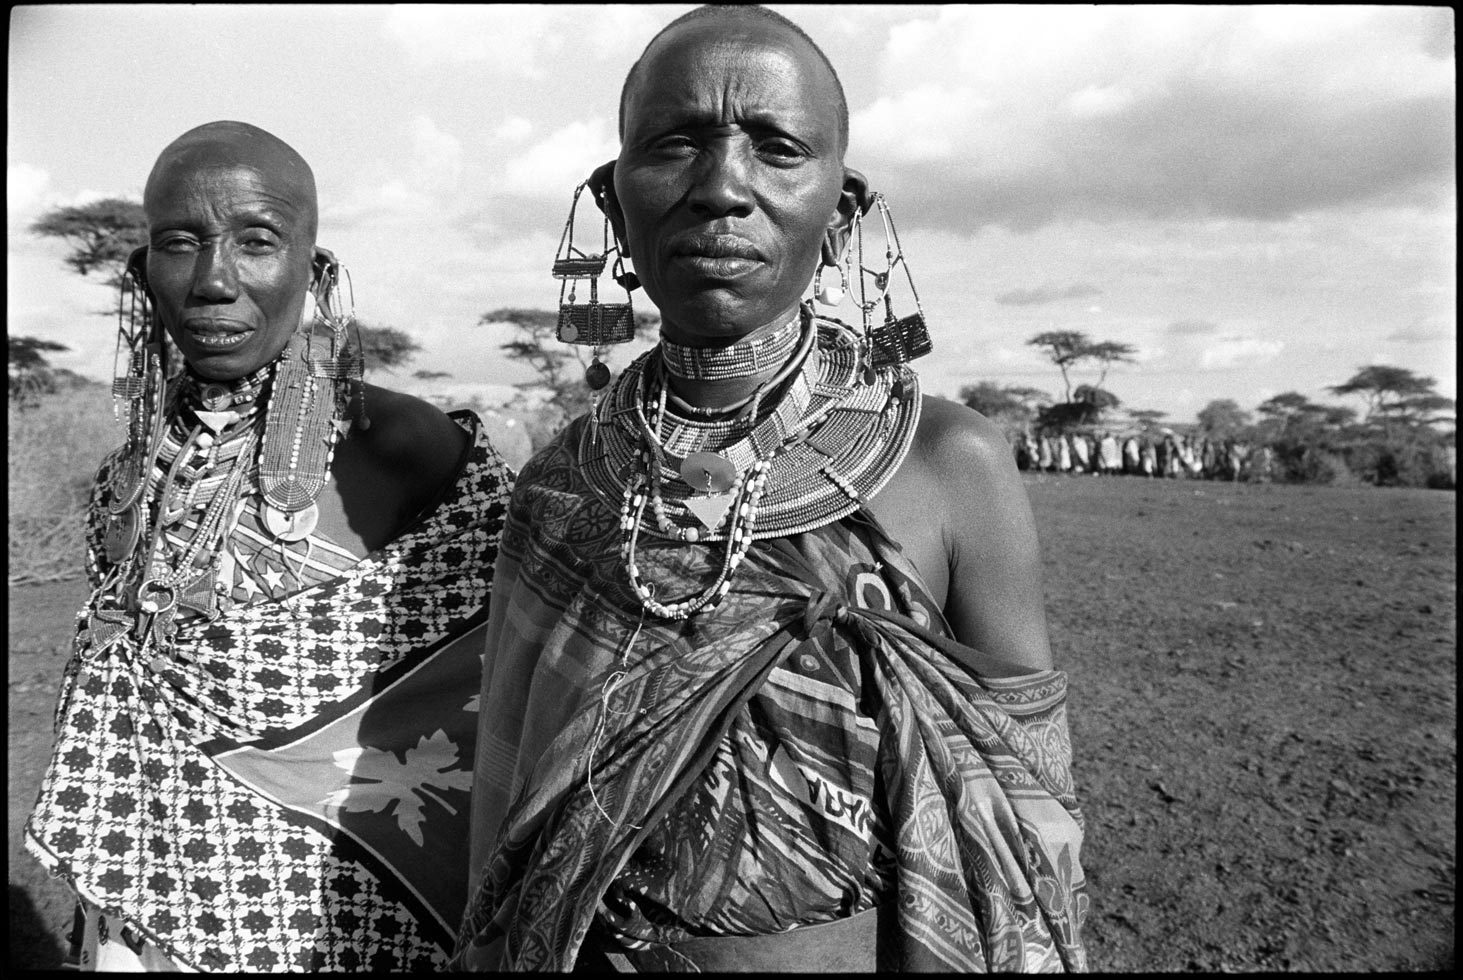 "Where there are two people, there is double wisdom." Zambian proverb

Two Maasai women at a blessing ceremony.

Southern Kenya, 1995